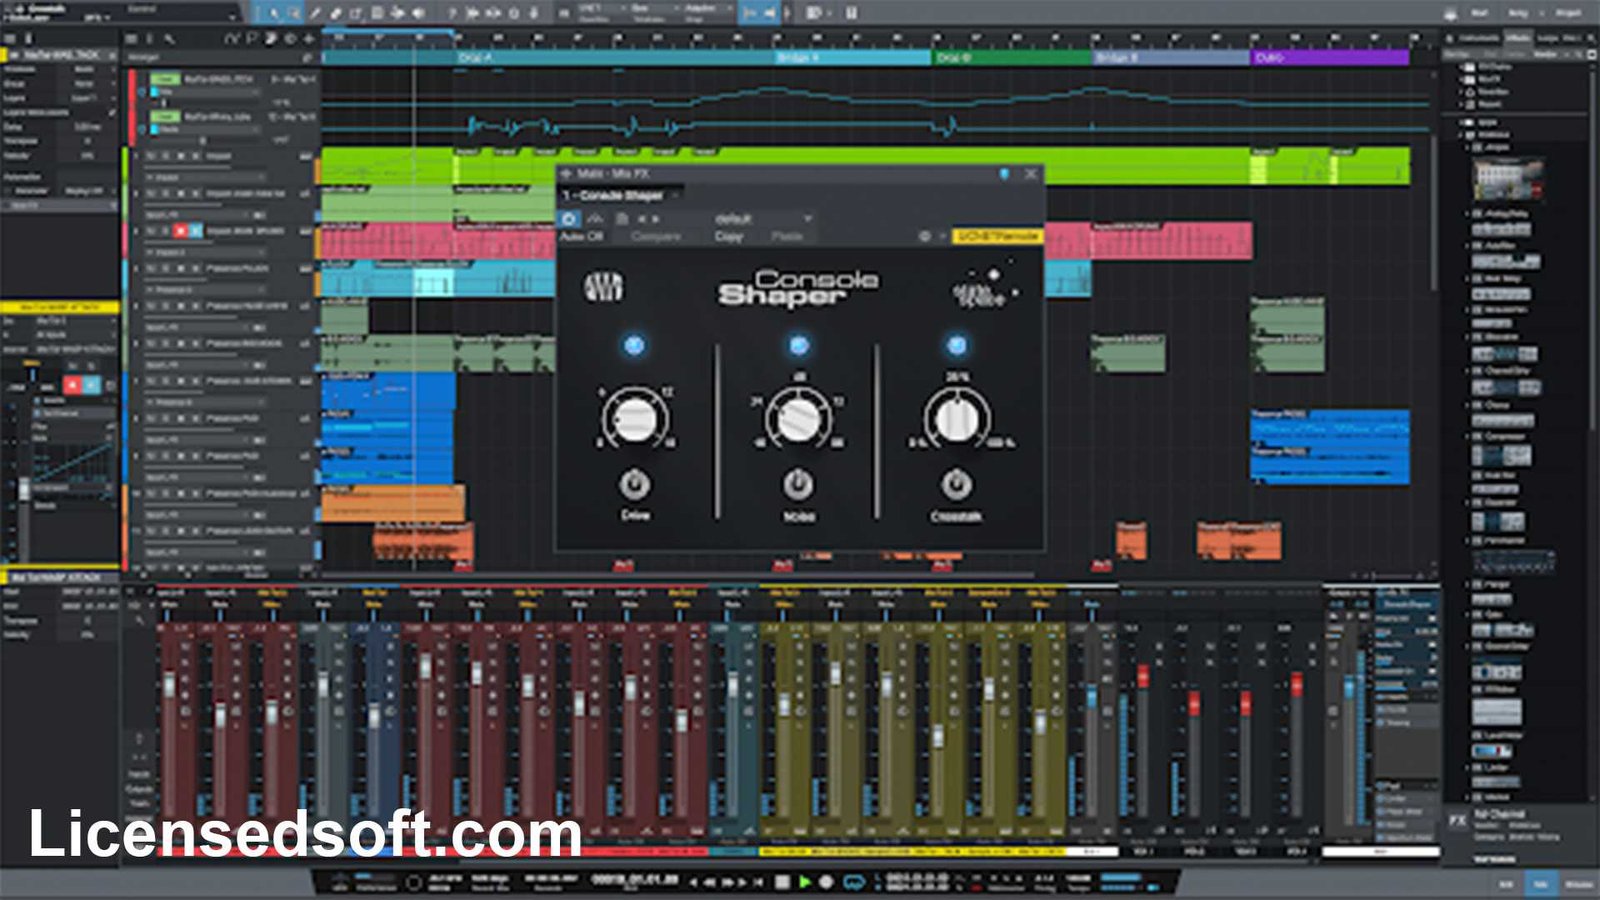 PreSonus-Studio-One-Professional-6.5.2-For-macOS-cover photo-by-licensedsoft.